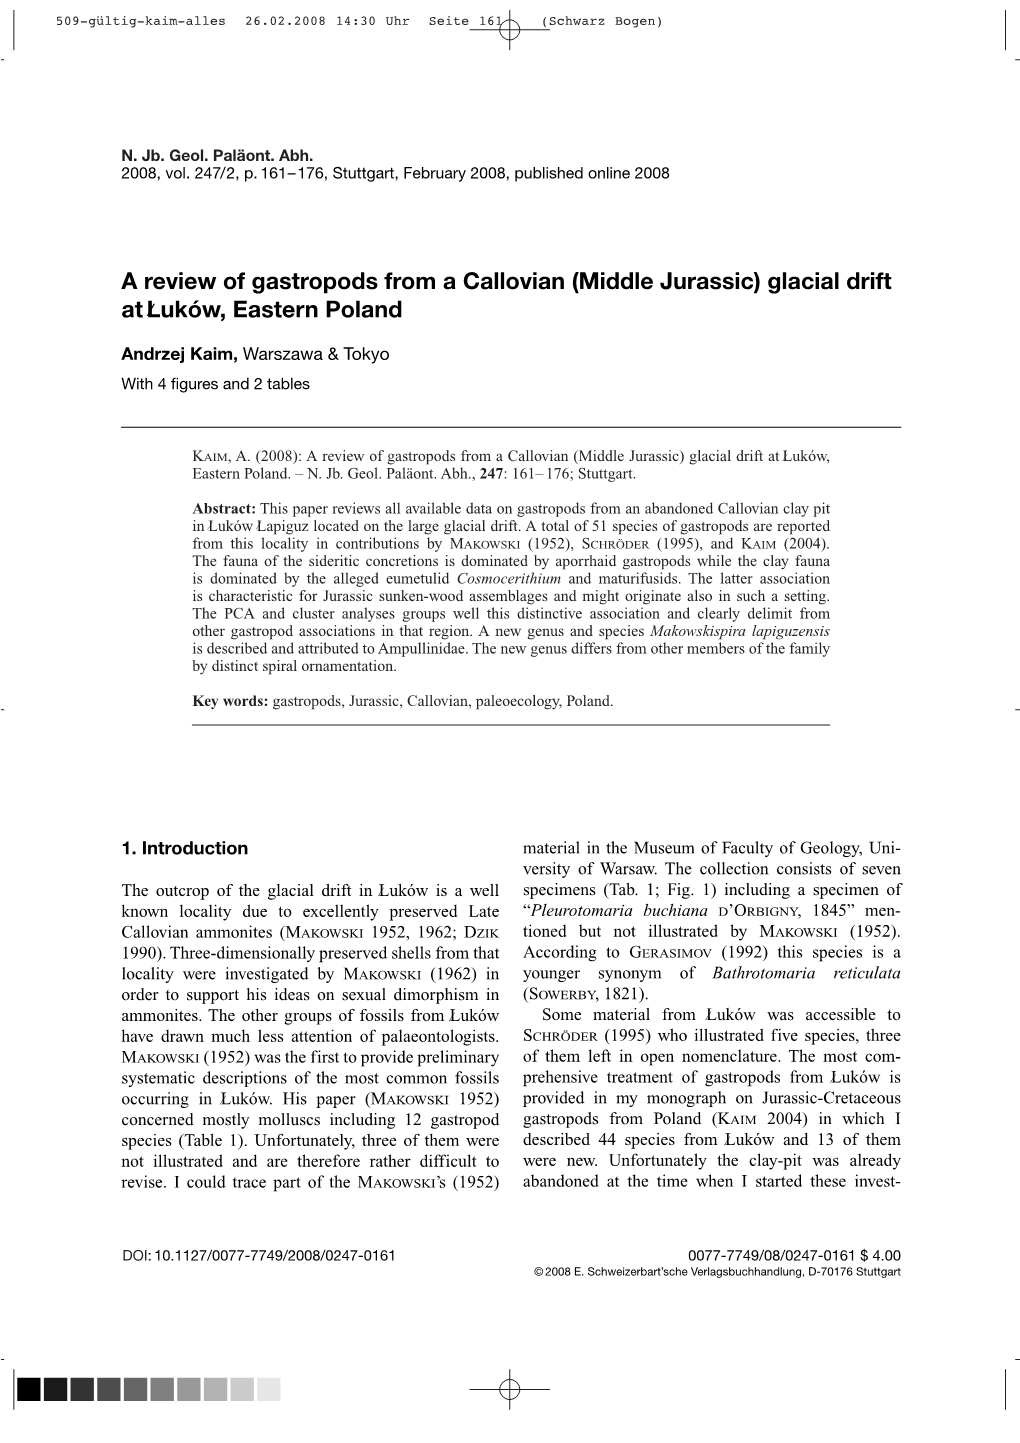 A Review of Gastropods from a Callovian (Middle Jurassic) Glacial Drift at Luków,⁄ Eastern Poland